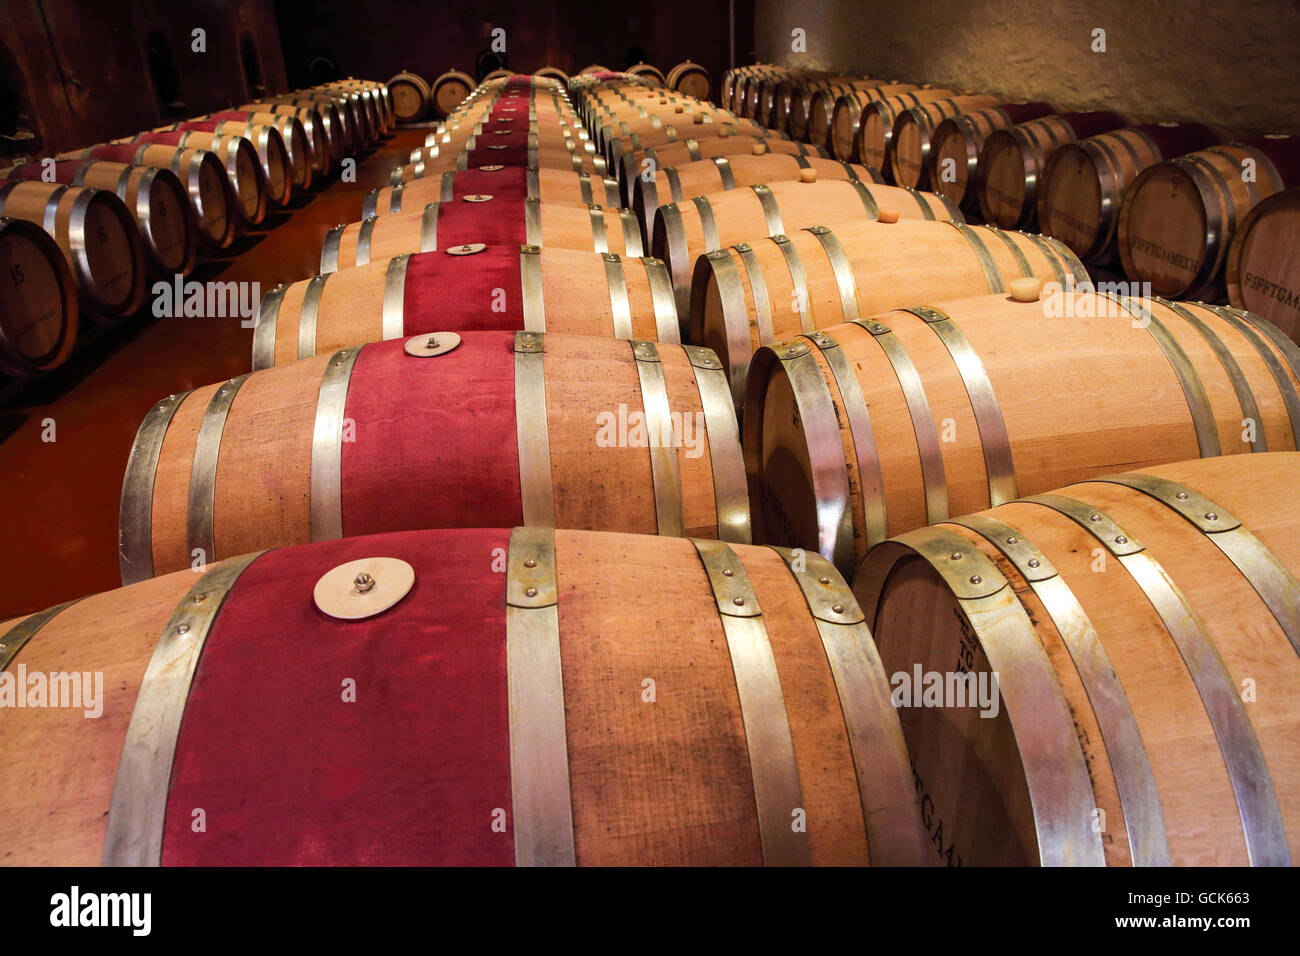 Barrels of wine maturing at Penfolds Cellars in Adelaide Australia Stock Photo